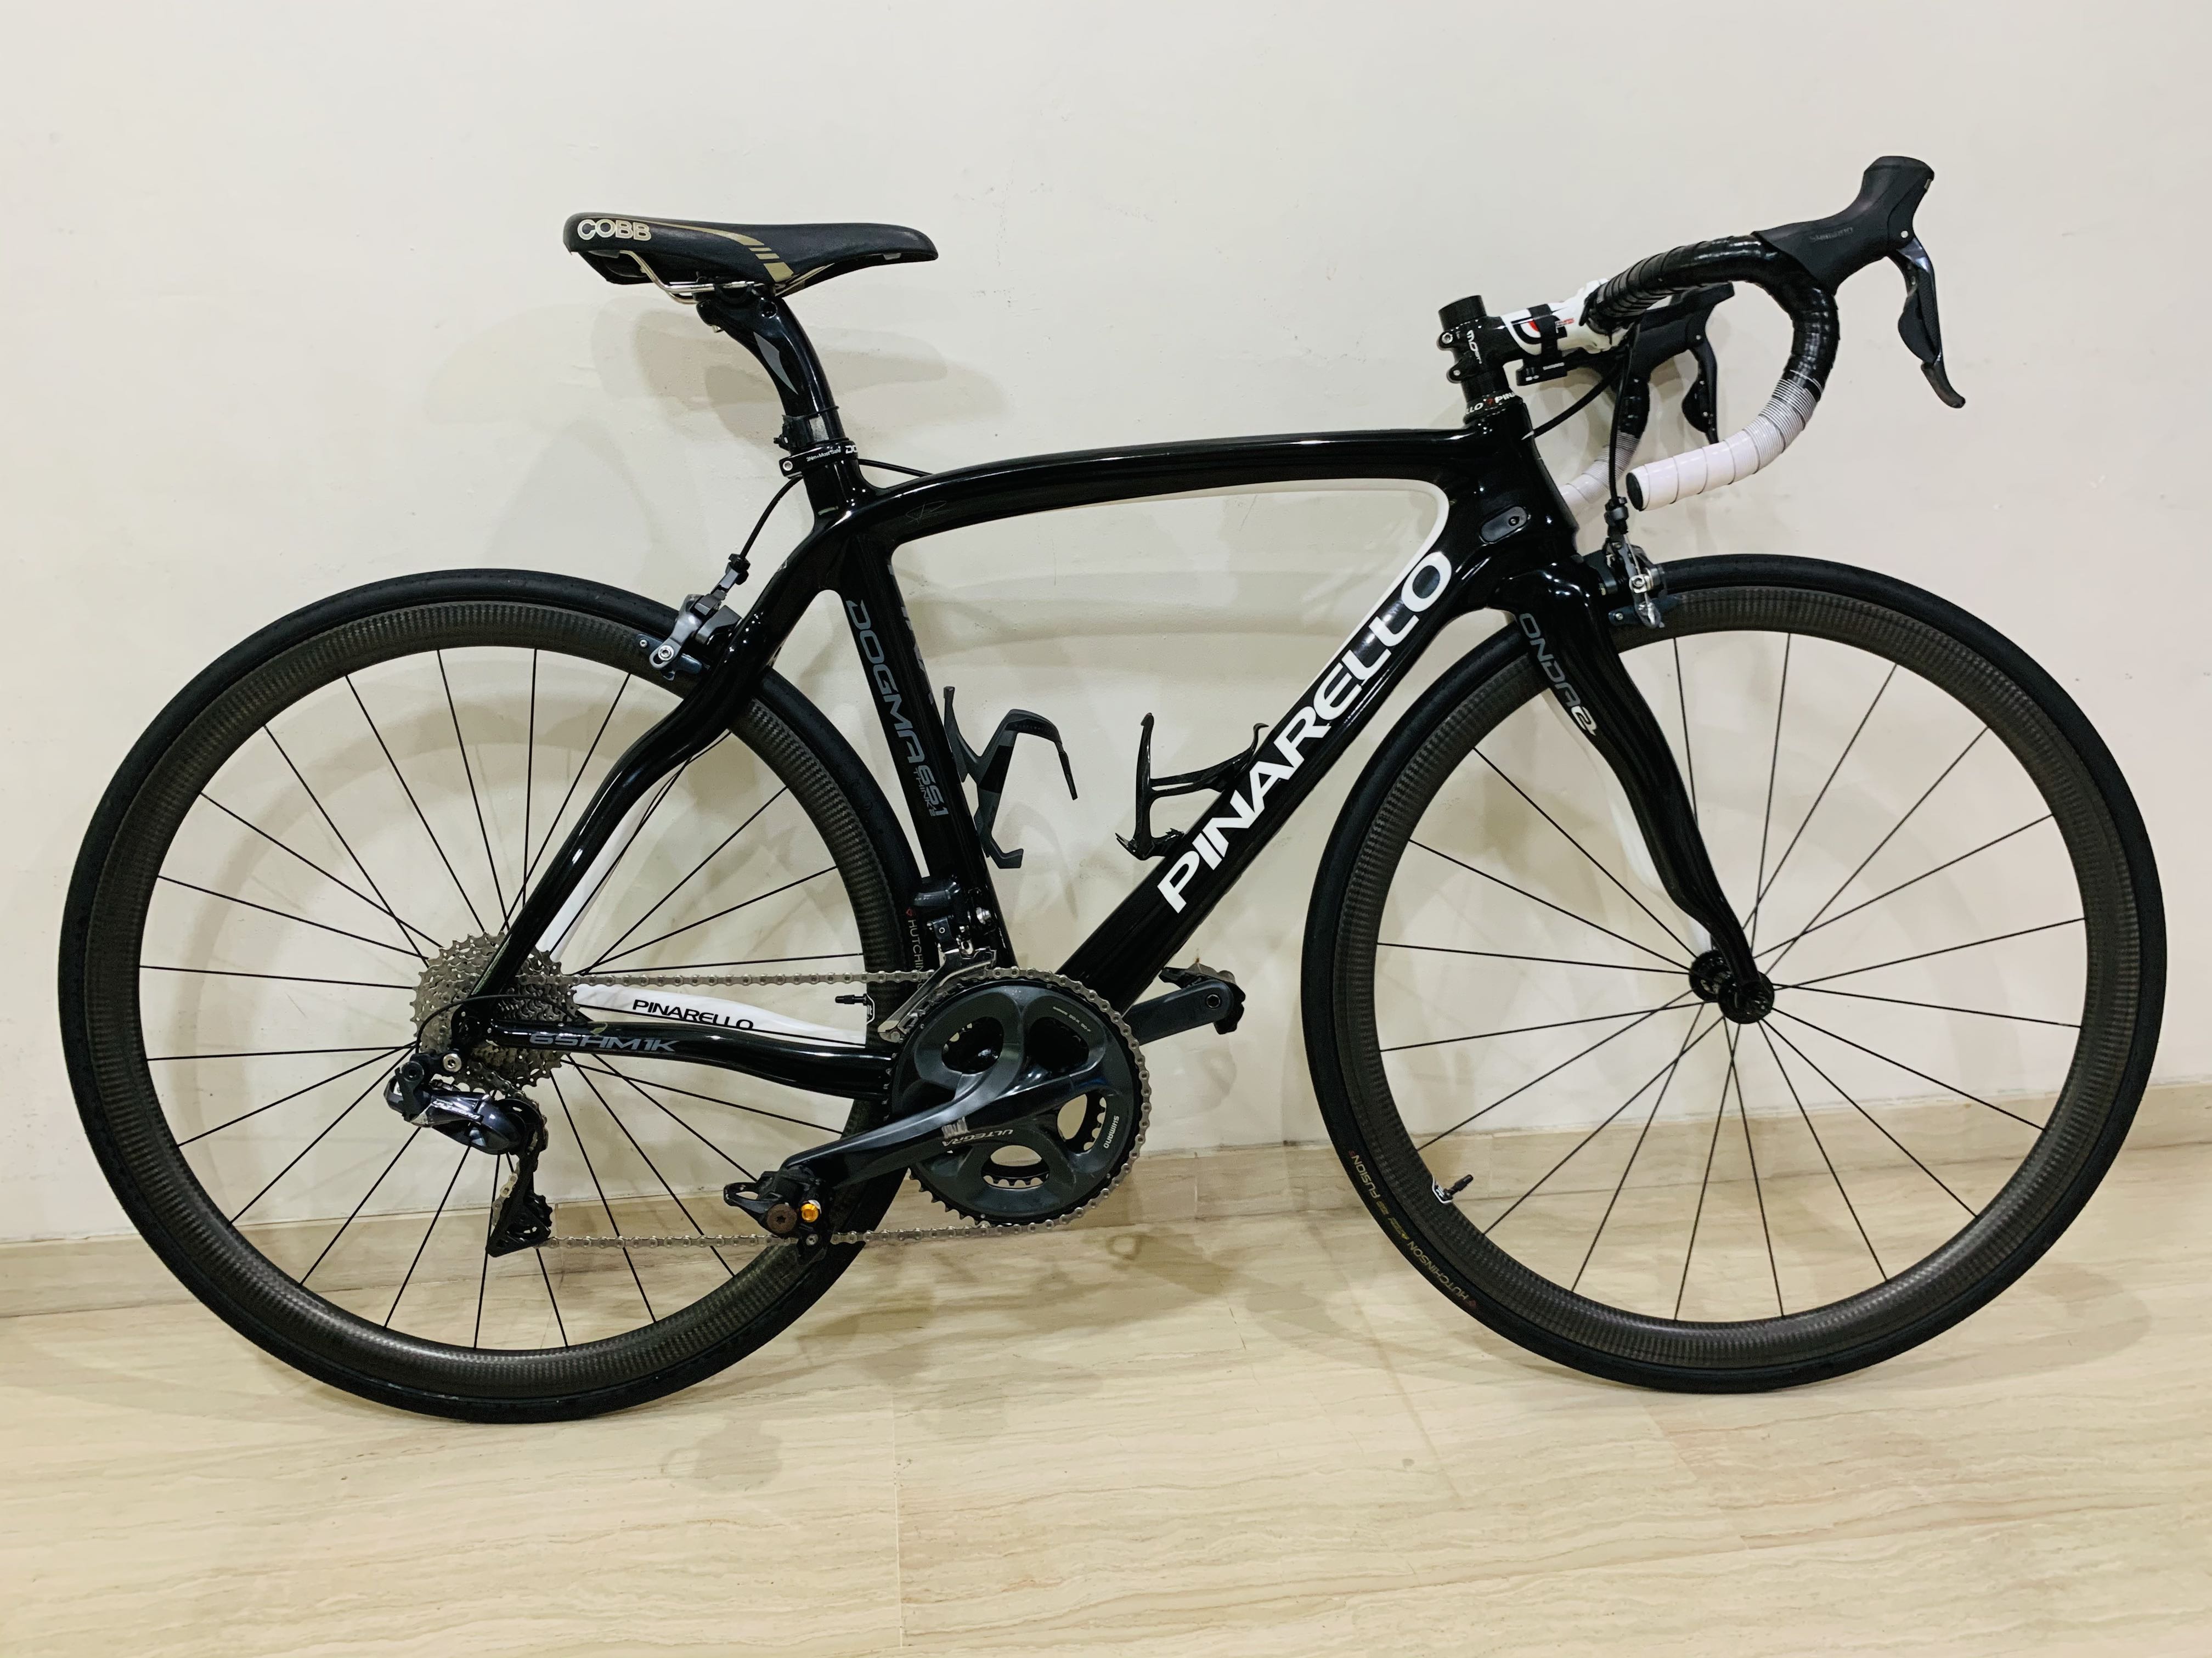 Pinarello Dogma 65.1 Think 2 size 50, Sports Equipment, Bicycles ...